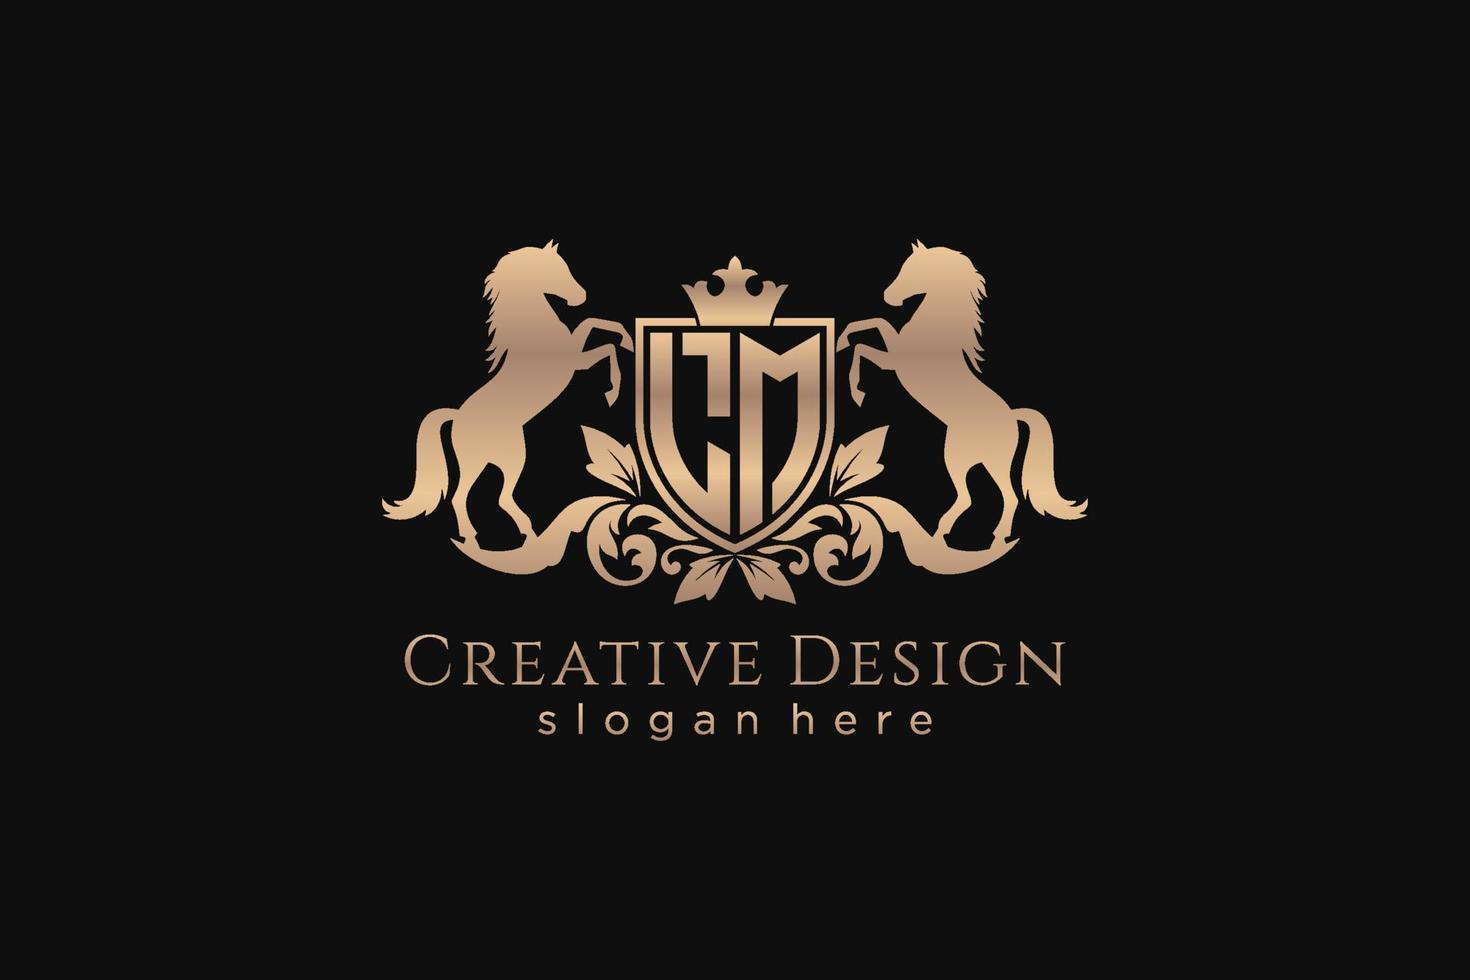 initial LM Retro golden crest with shield and two horses, badge template with scrolls and royal crown - perfect for luxurious branding projects vector